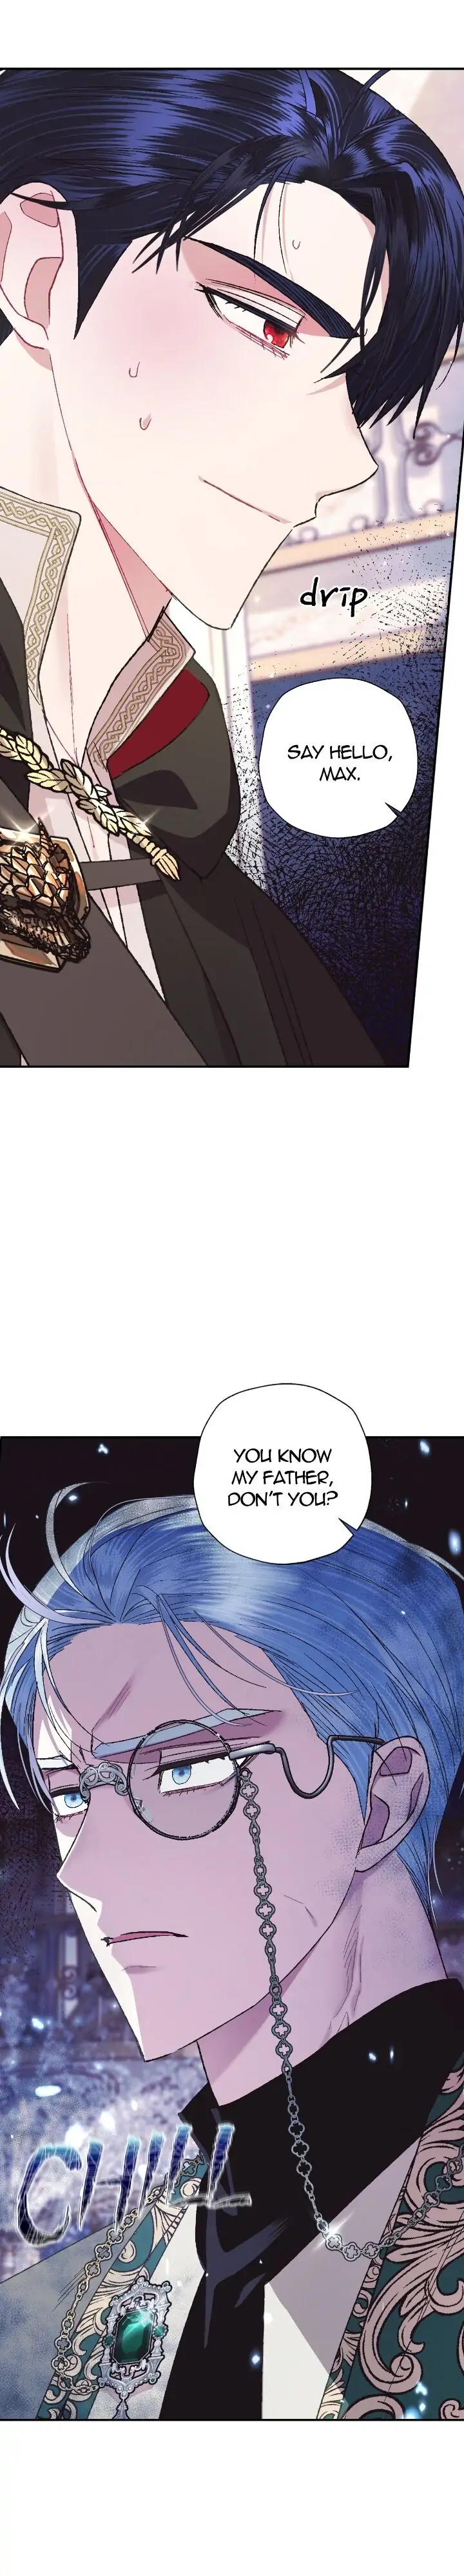 Father, I Don’t Want to Get Married!  - page 5